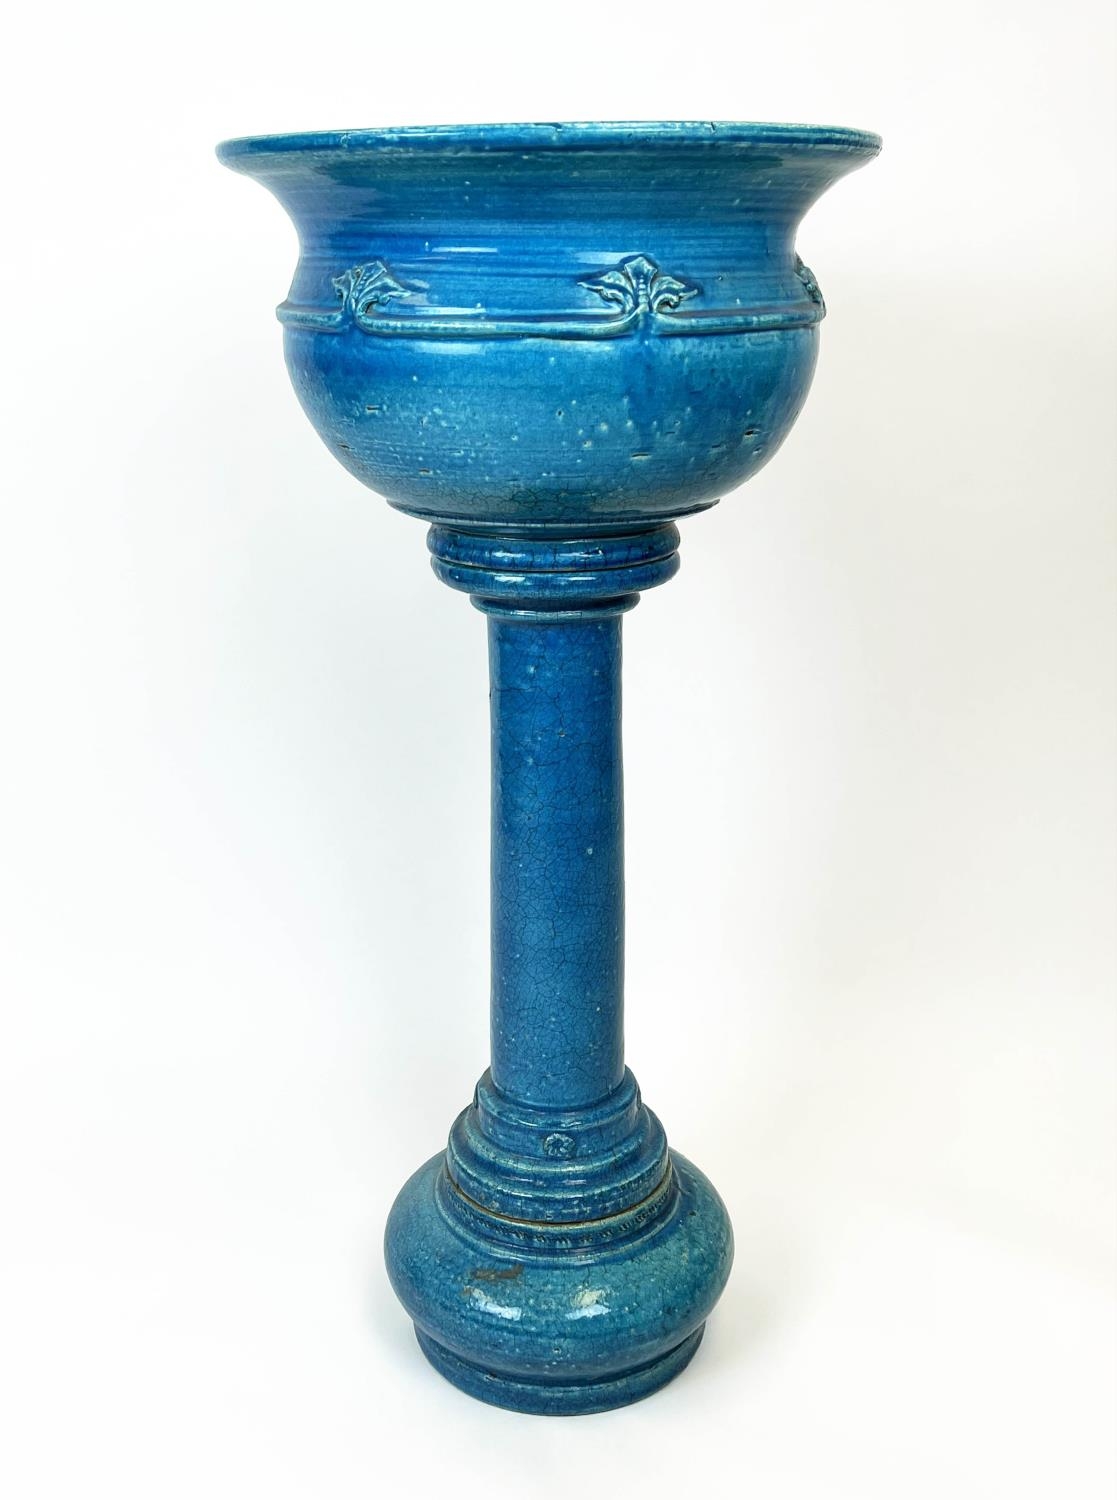 JARDINIERE ON STAND, Victorian style turquoise glazed ceramic, 102cm H.